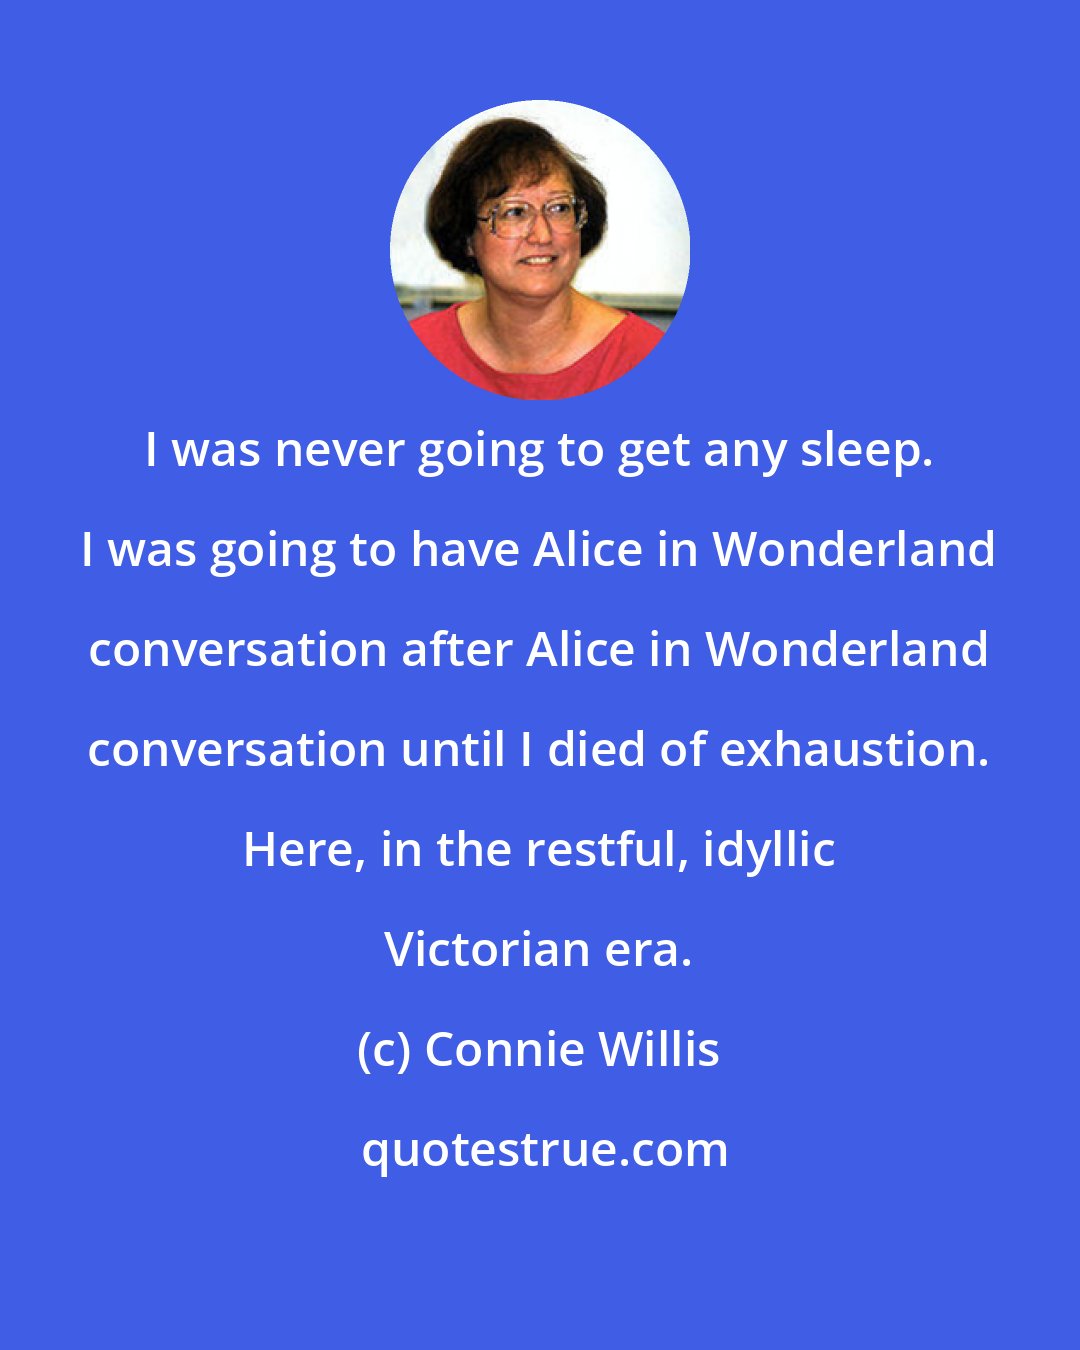 Connie Willis: I was never going to get any sleep. I was going to have Alice in Wonderland conversation after Alice in Wonderland conversation until I died of exhaustion. Here, in the restful, idyllic Victorian era.